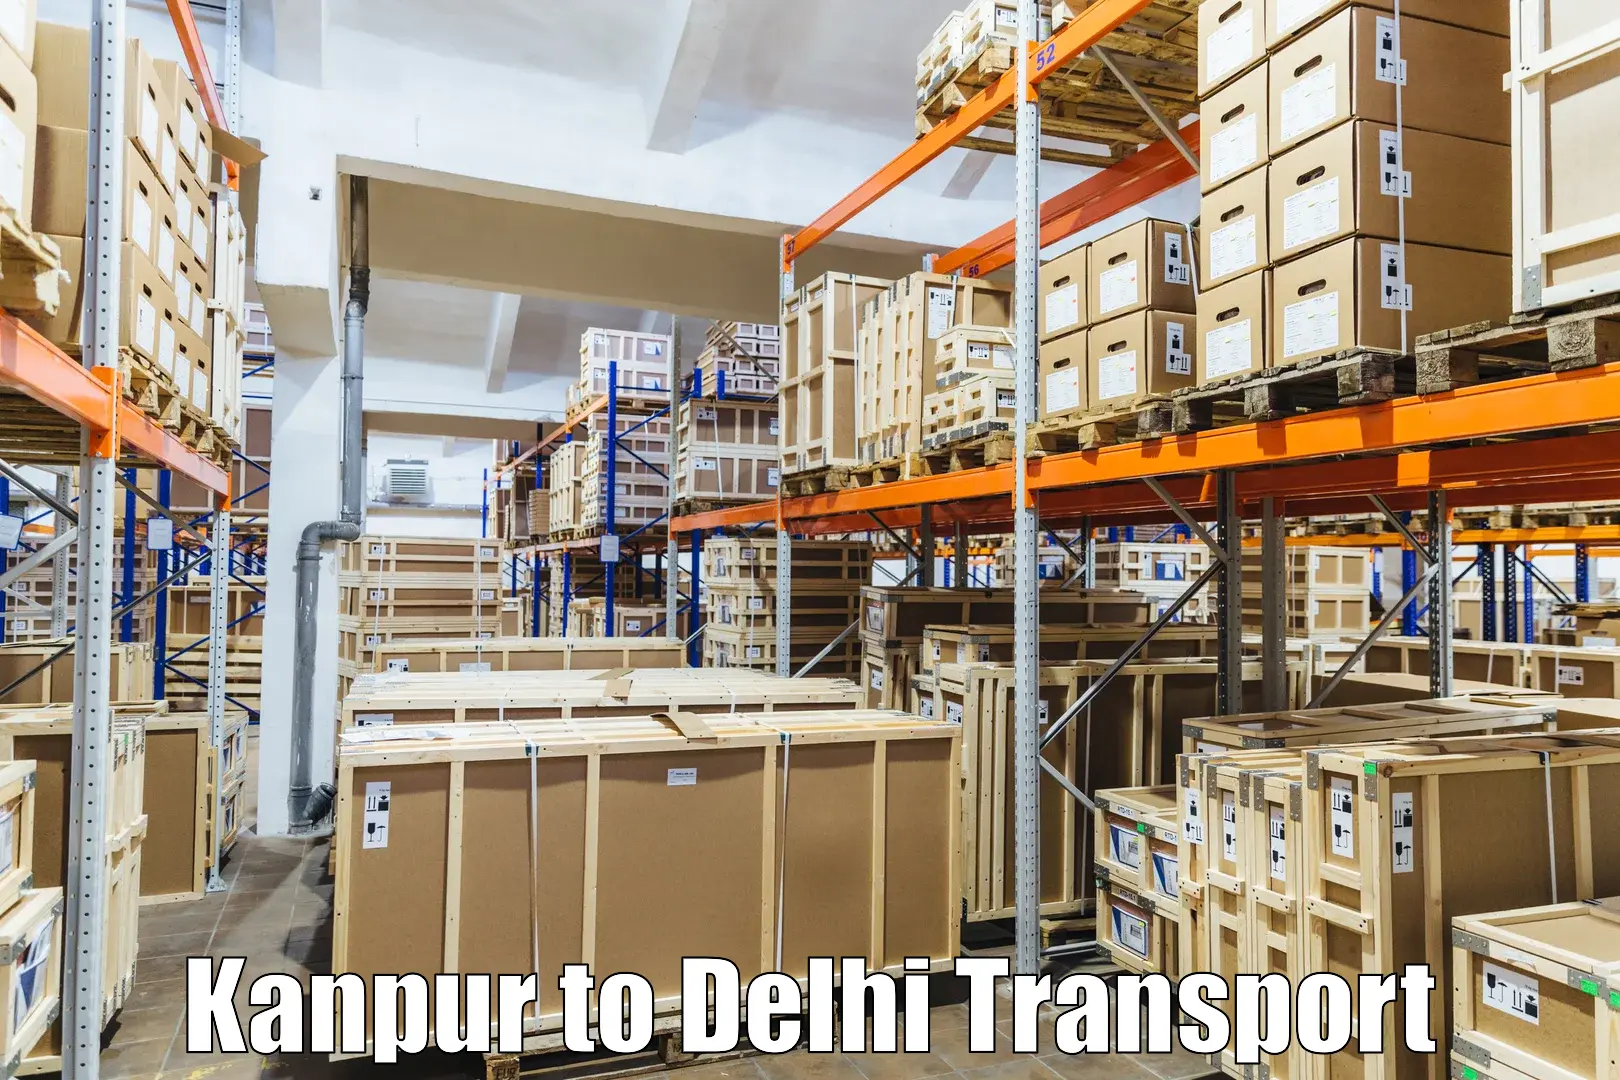 Lorry transport service Kanpur to University of Delhi